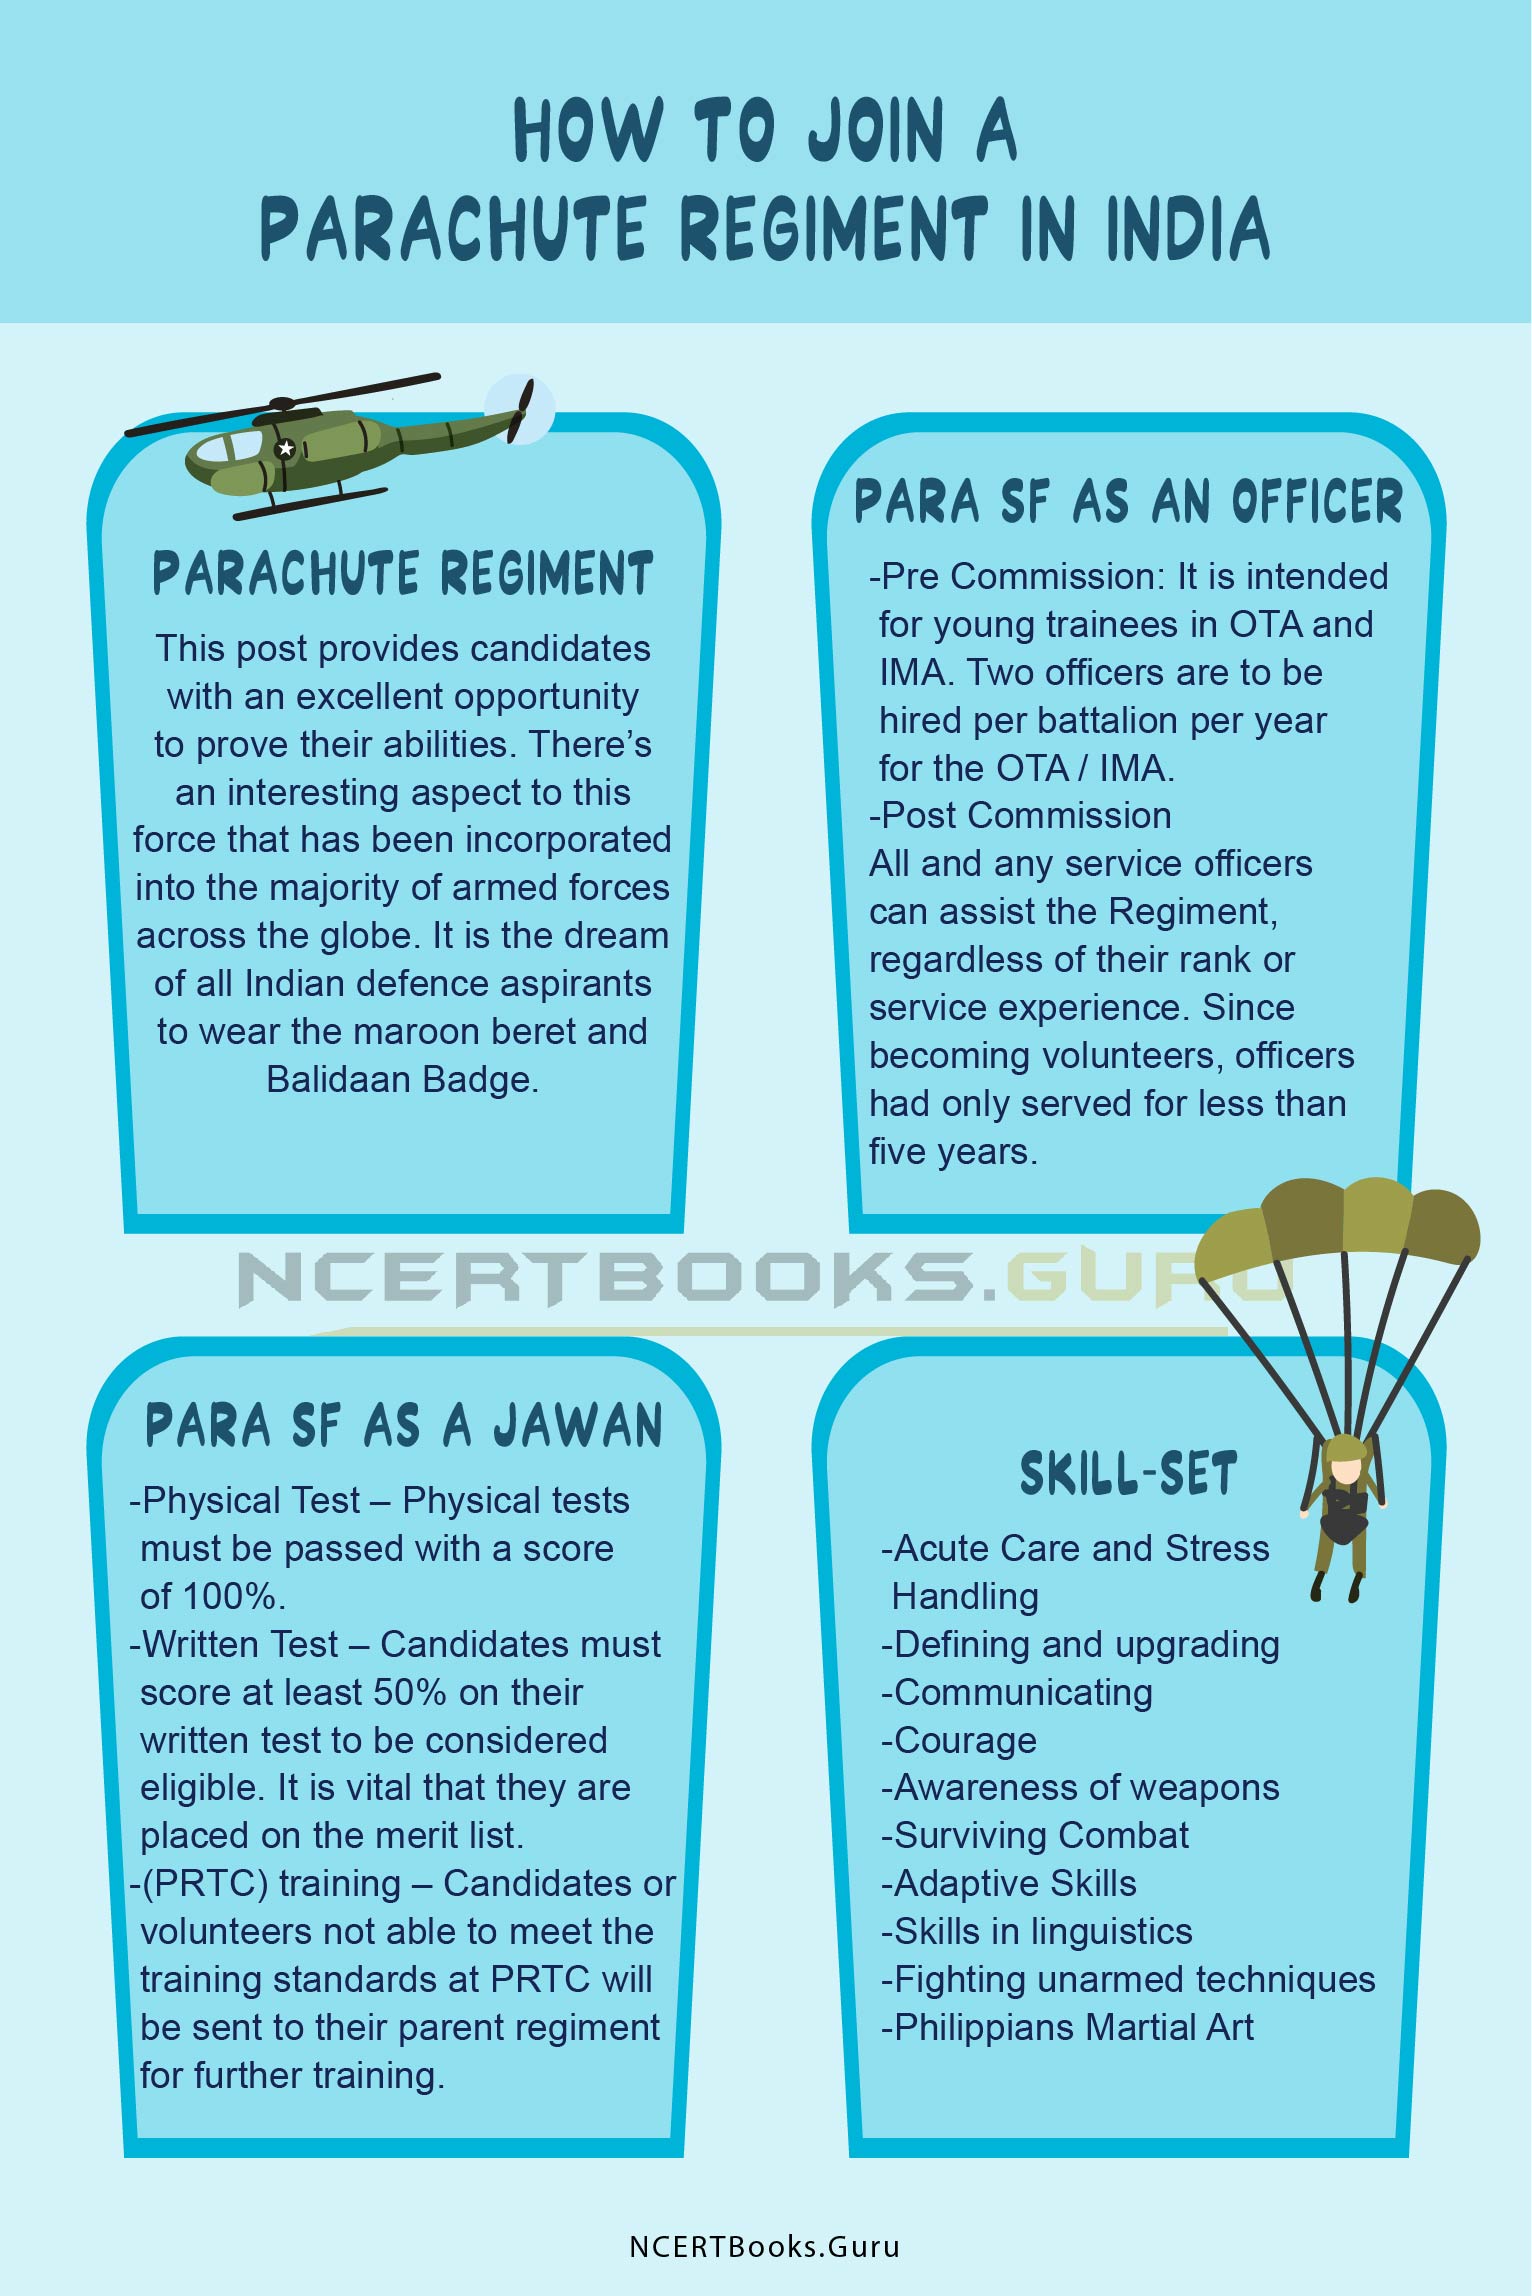 How to Join a Parachute Regiment in India